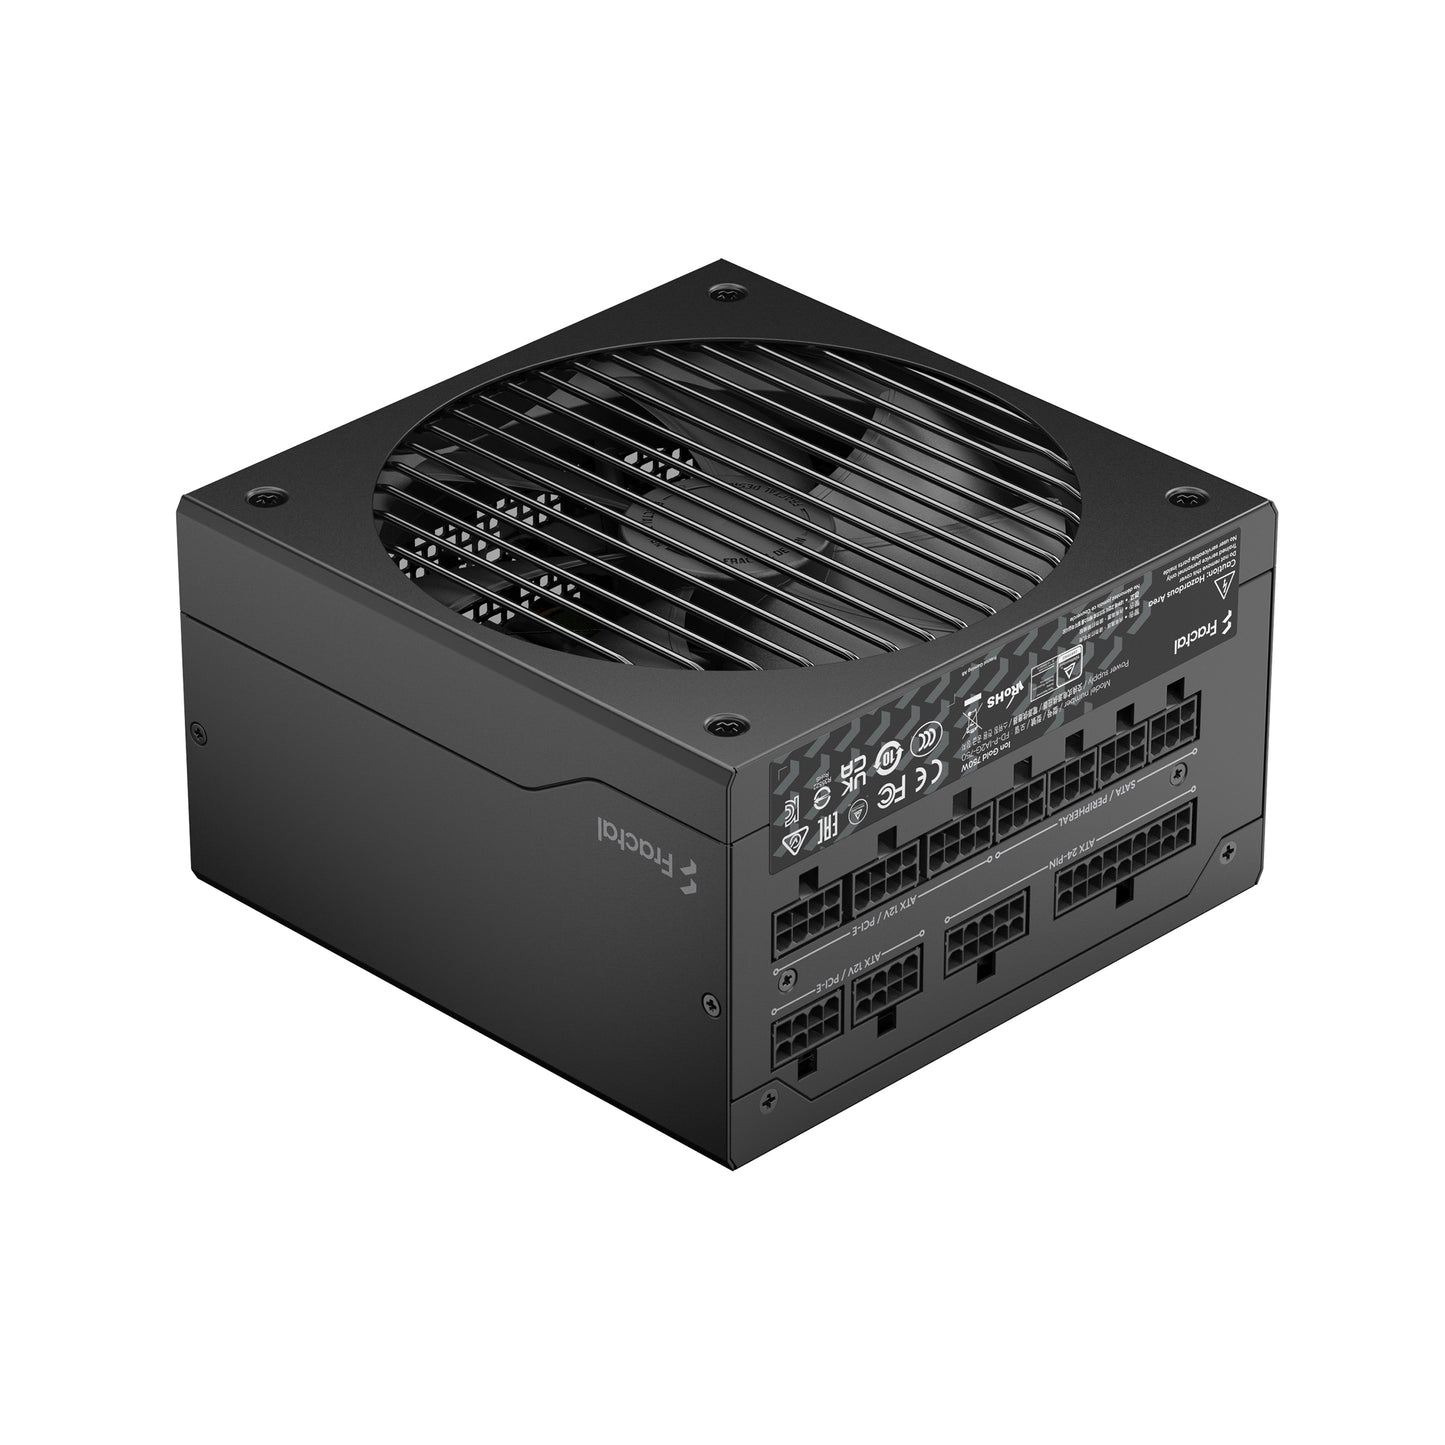 Fractal Design ION Gold 750W Fully Modular Power Supply, US Cord (FD-P-IA2G-750-US)